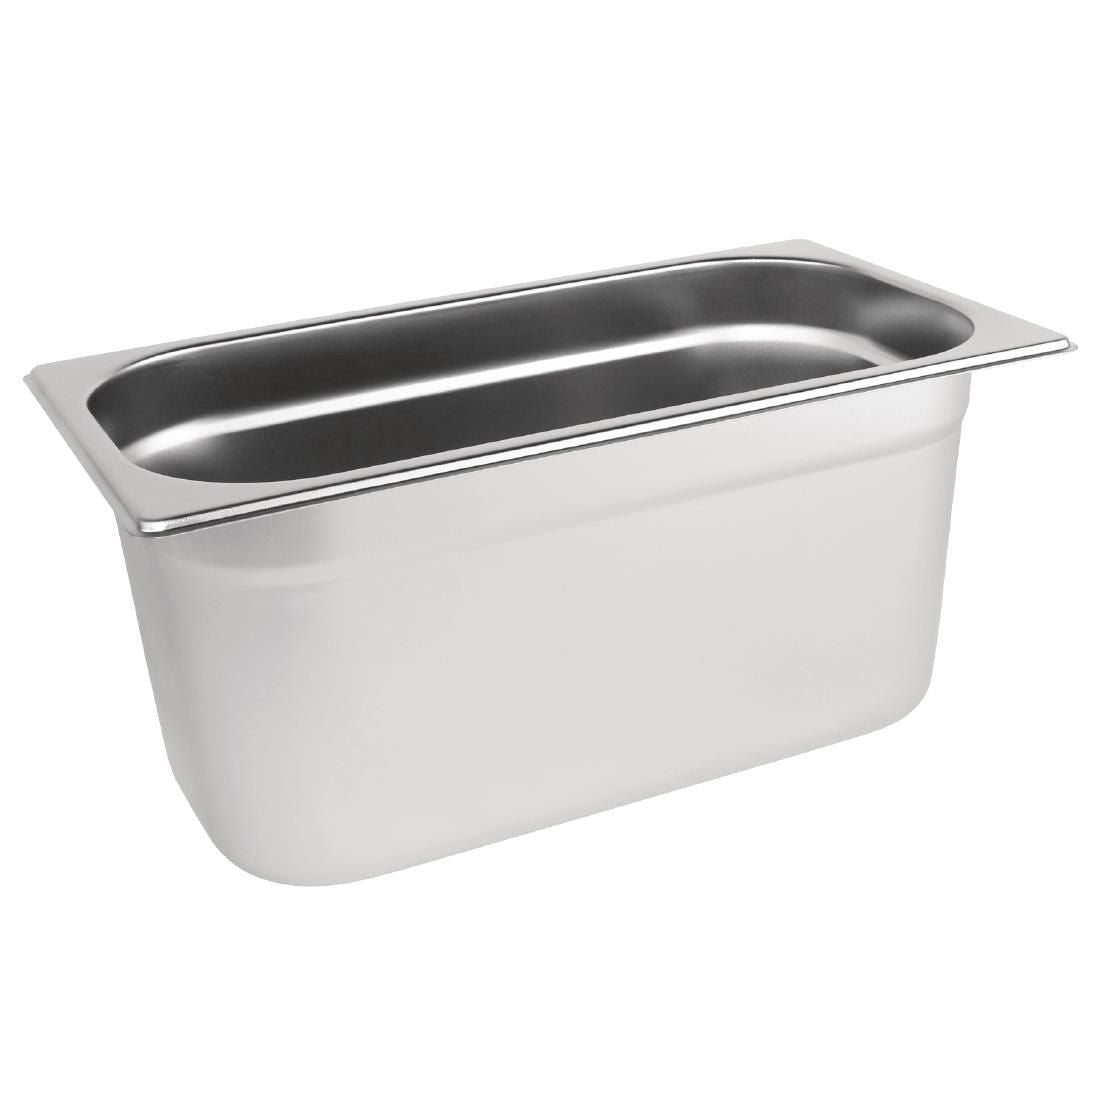 K934 Vogue Stainless Steel 1/3 Gastronorm Pan 150mm